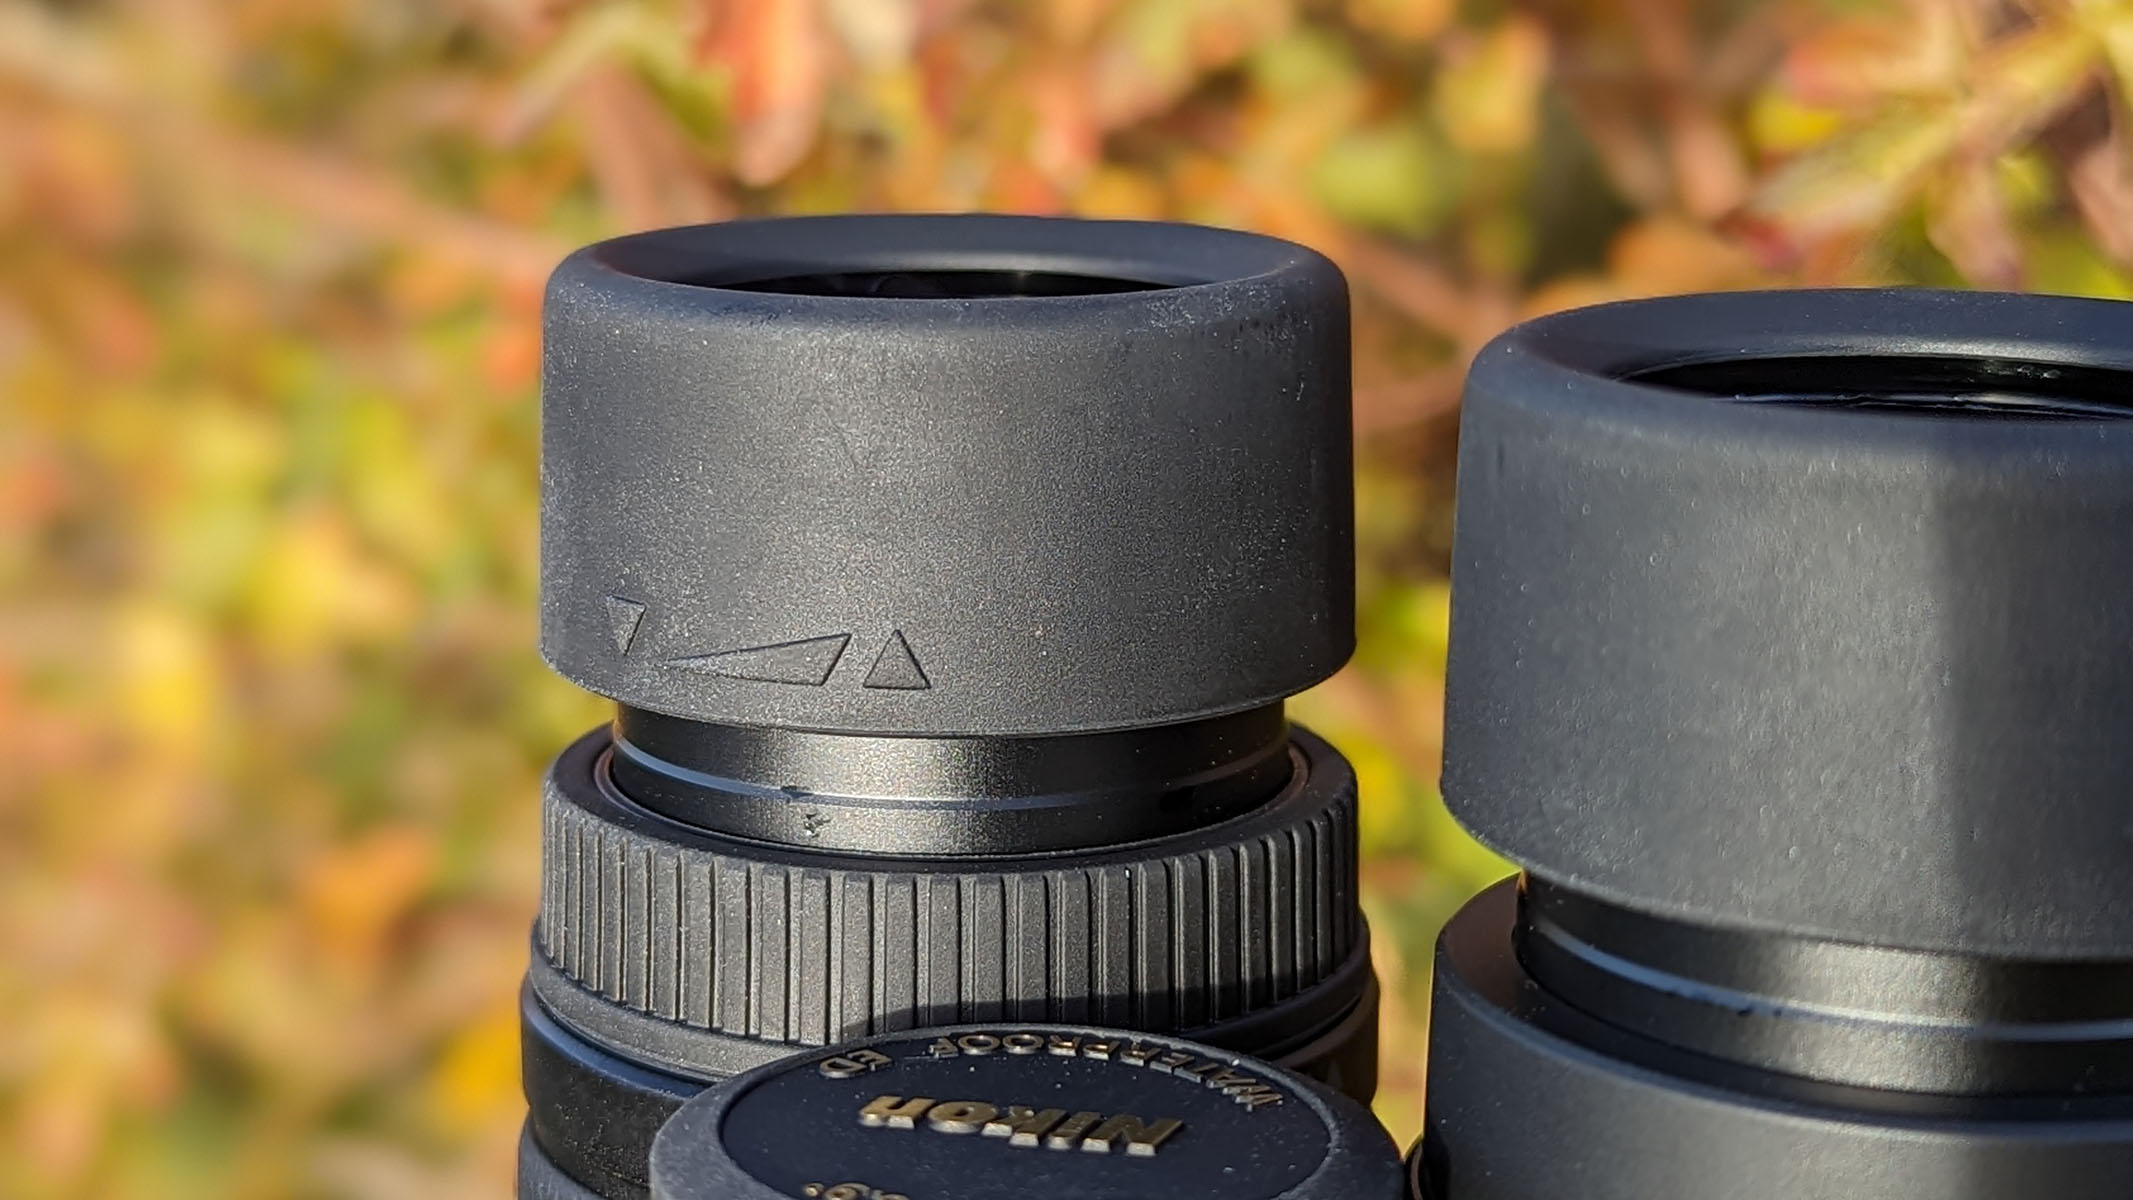 A close up of the twistable eyecups on the Nikon Monarch HG 10x42